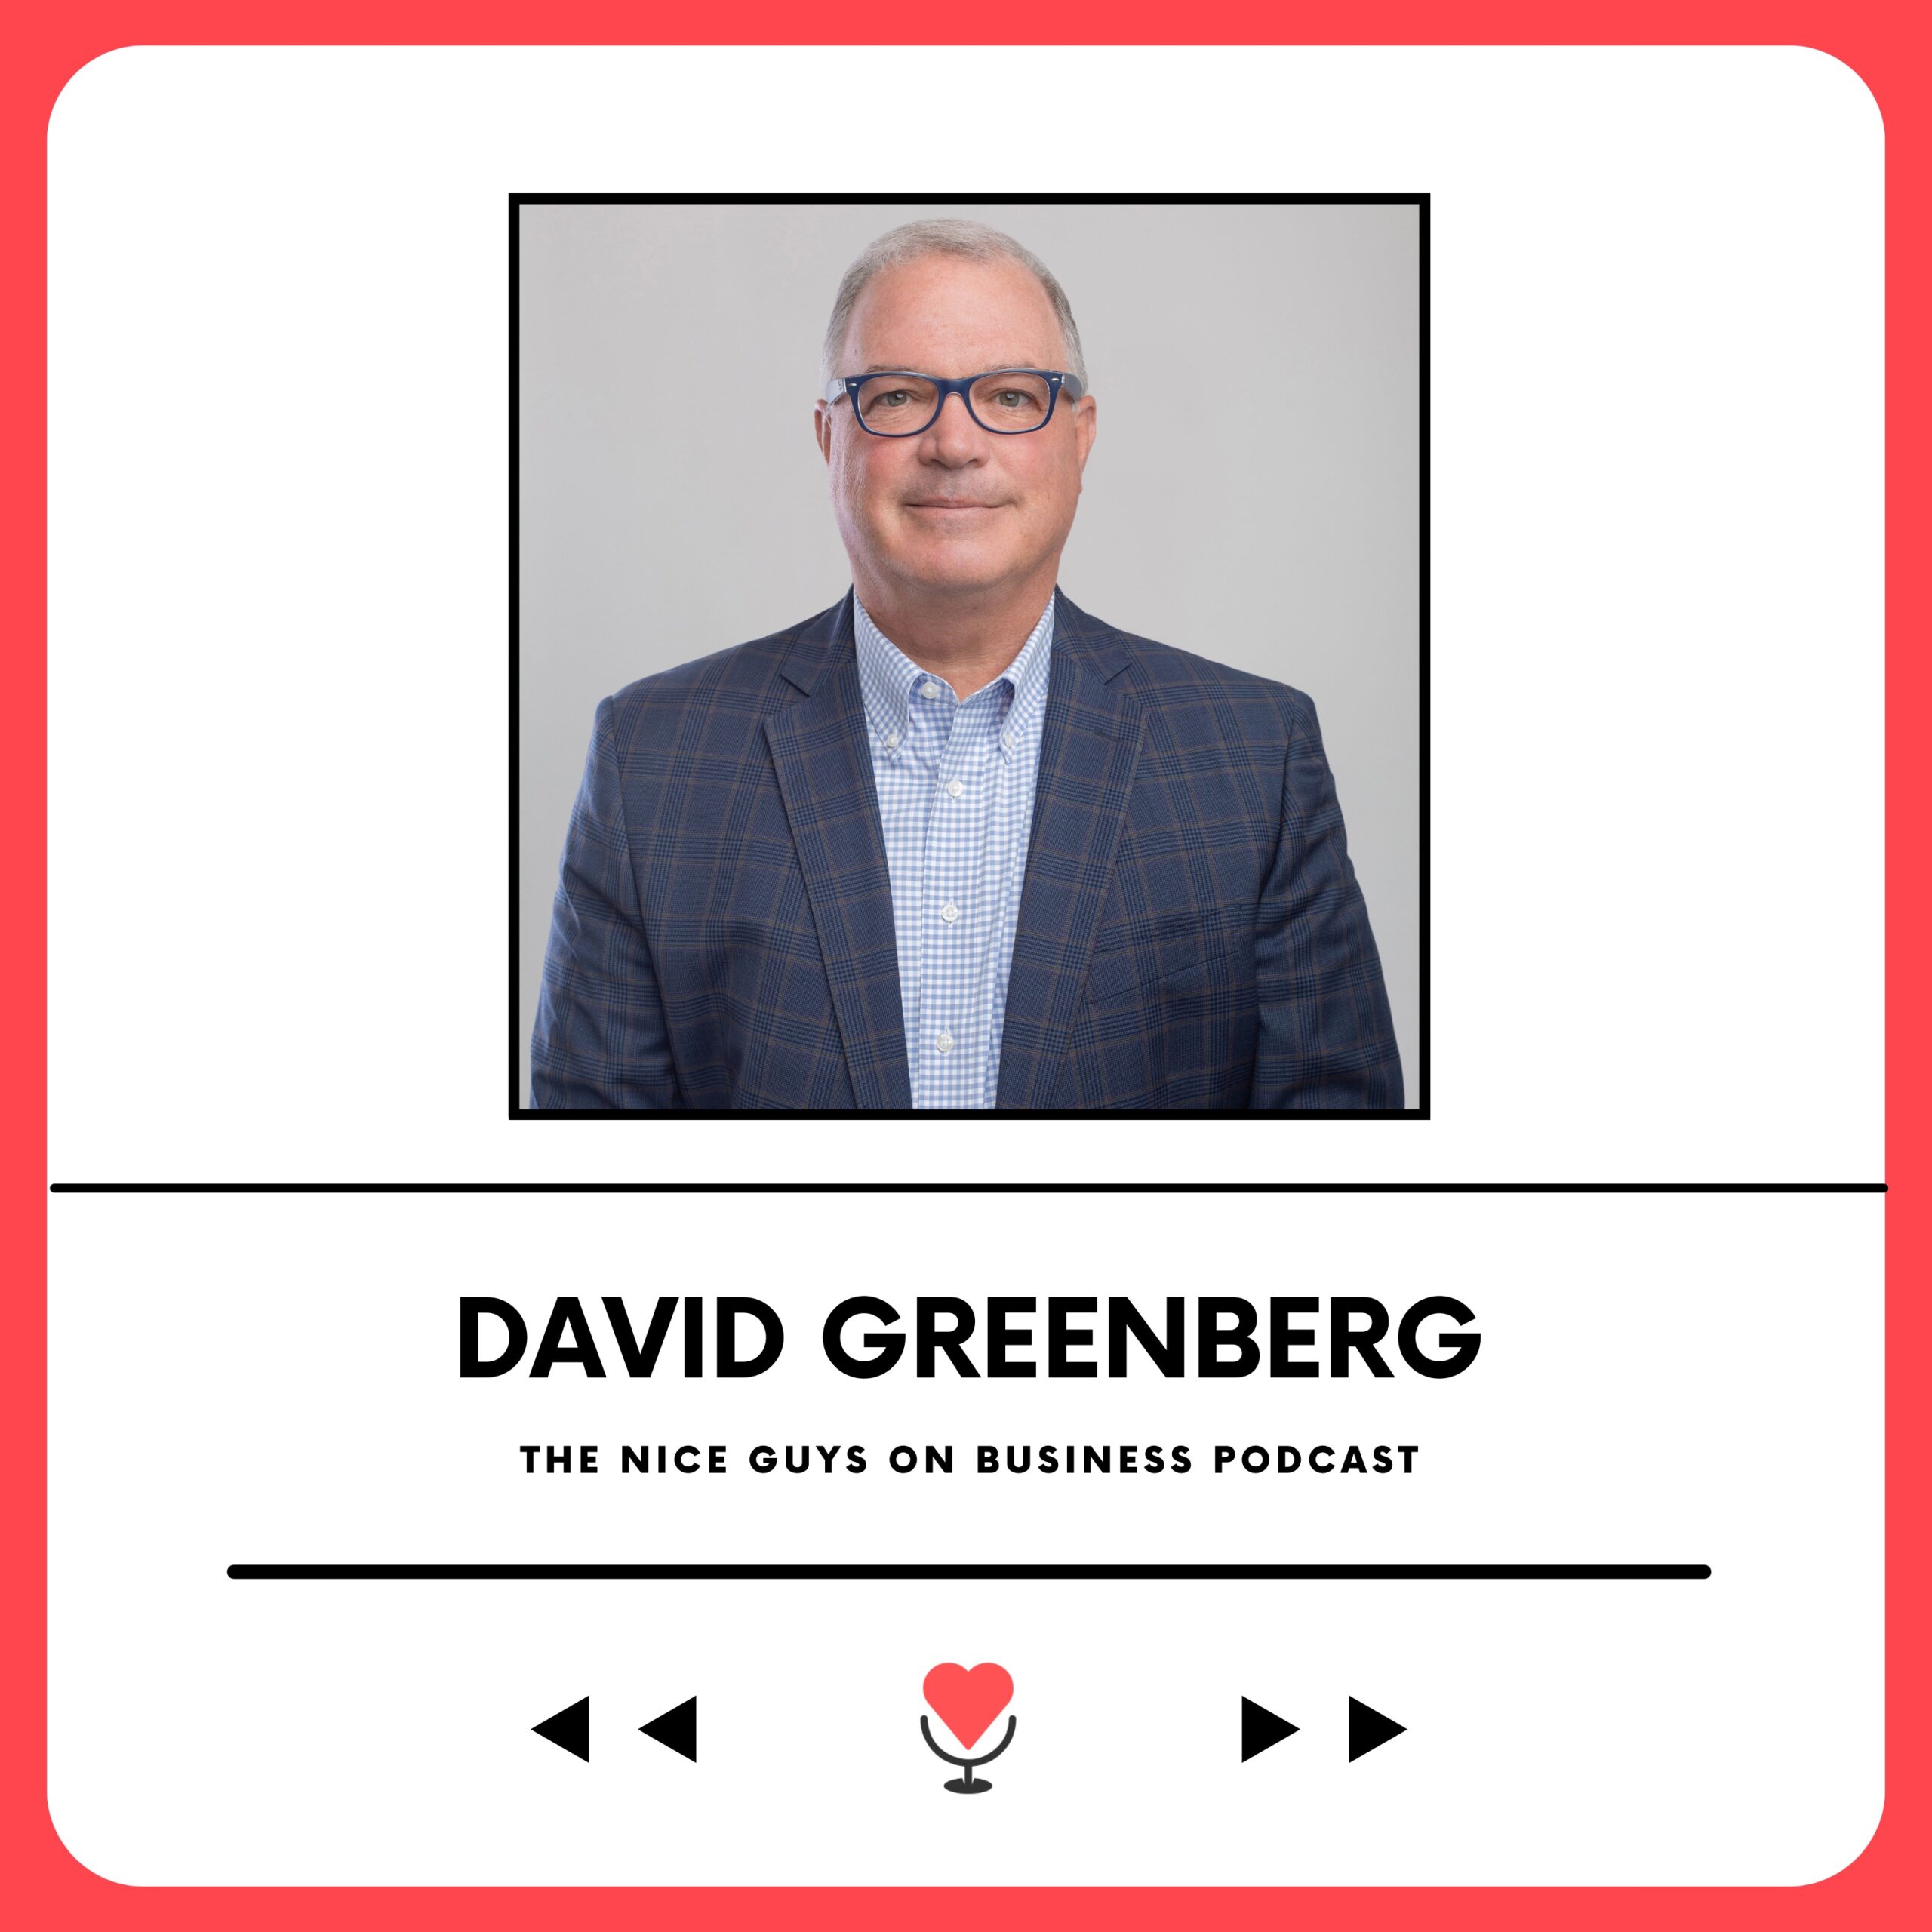 David Greenberg on the Nice Guys on Business podcast